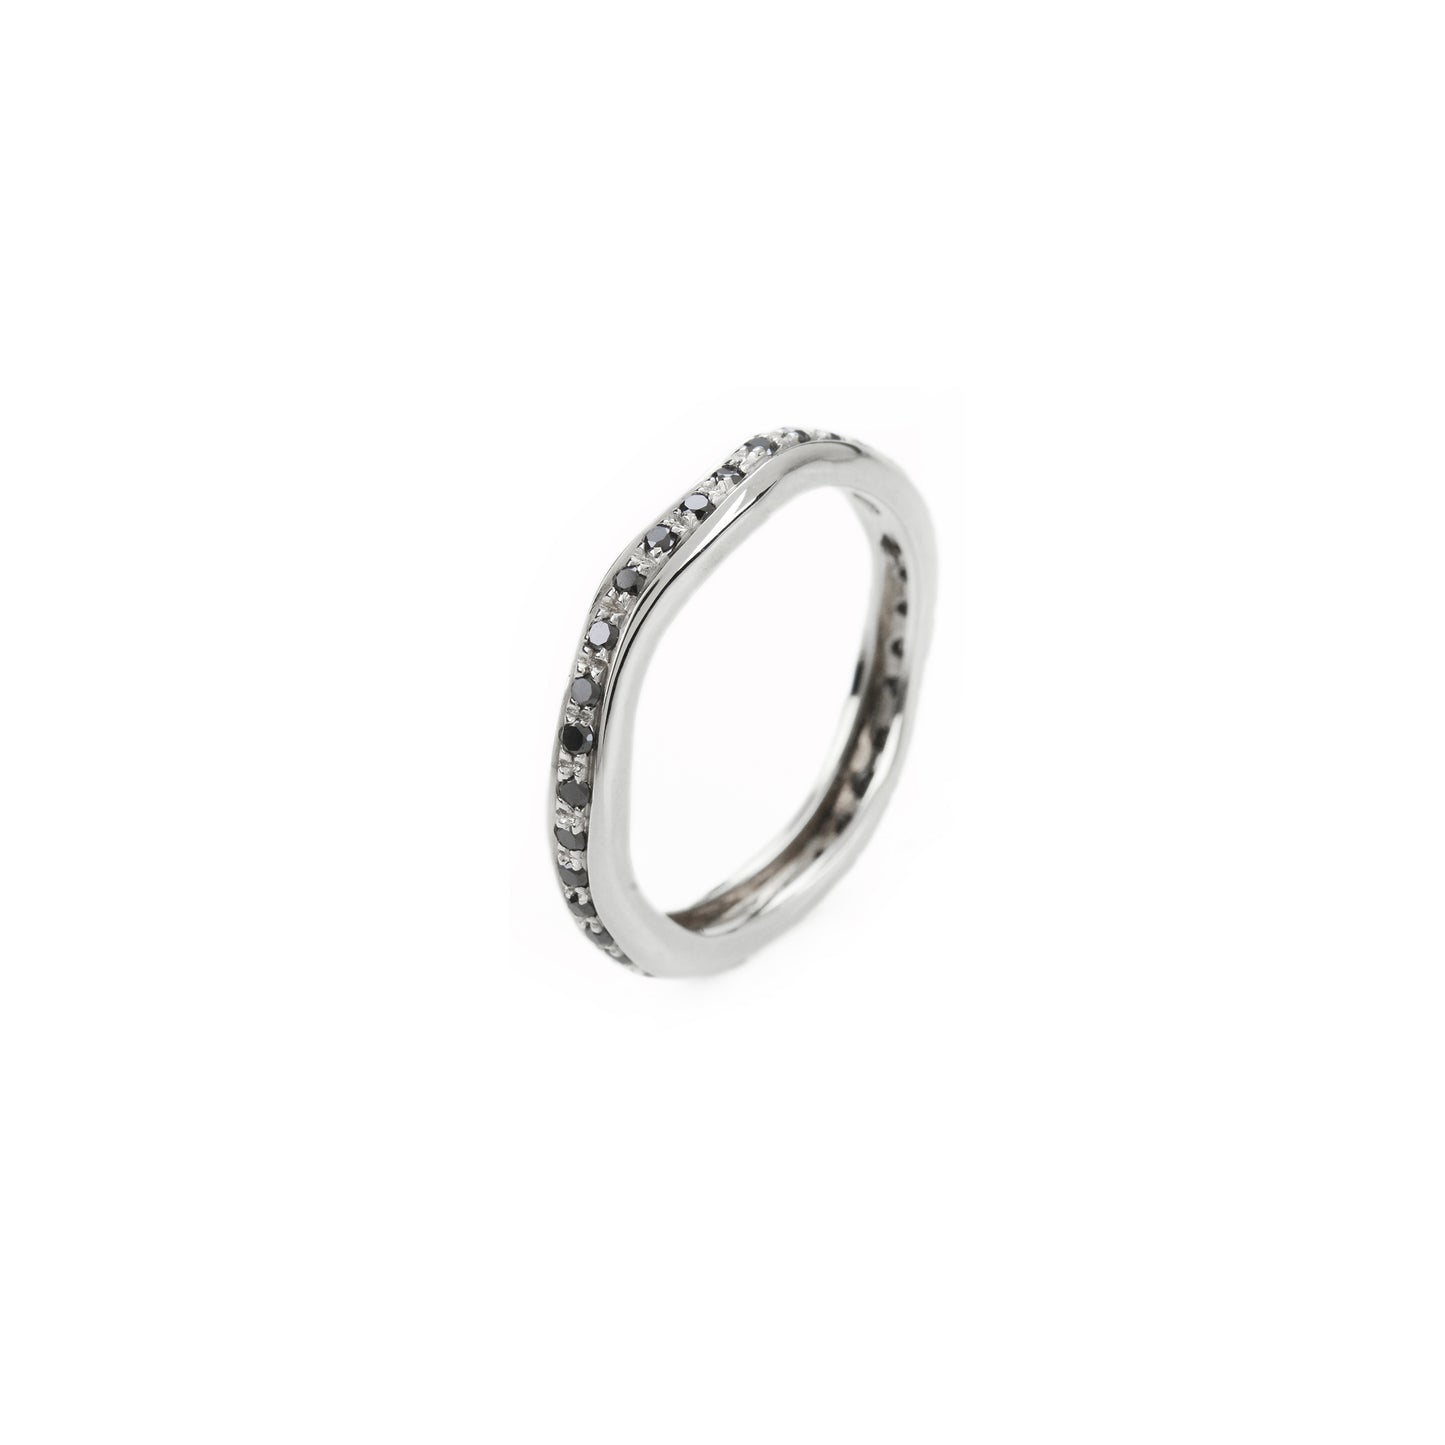 Wavy eternity ring in gold and black diamonds